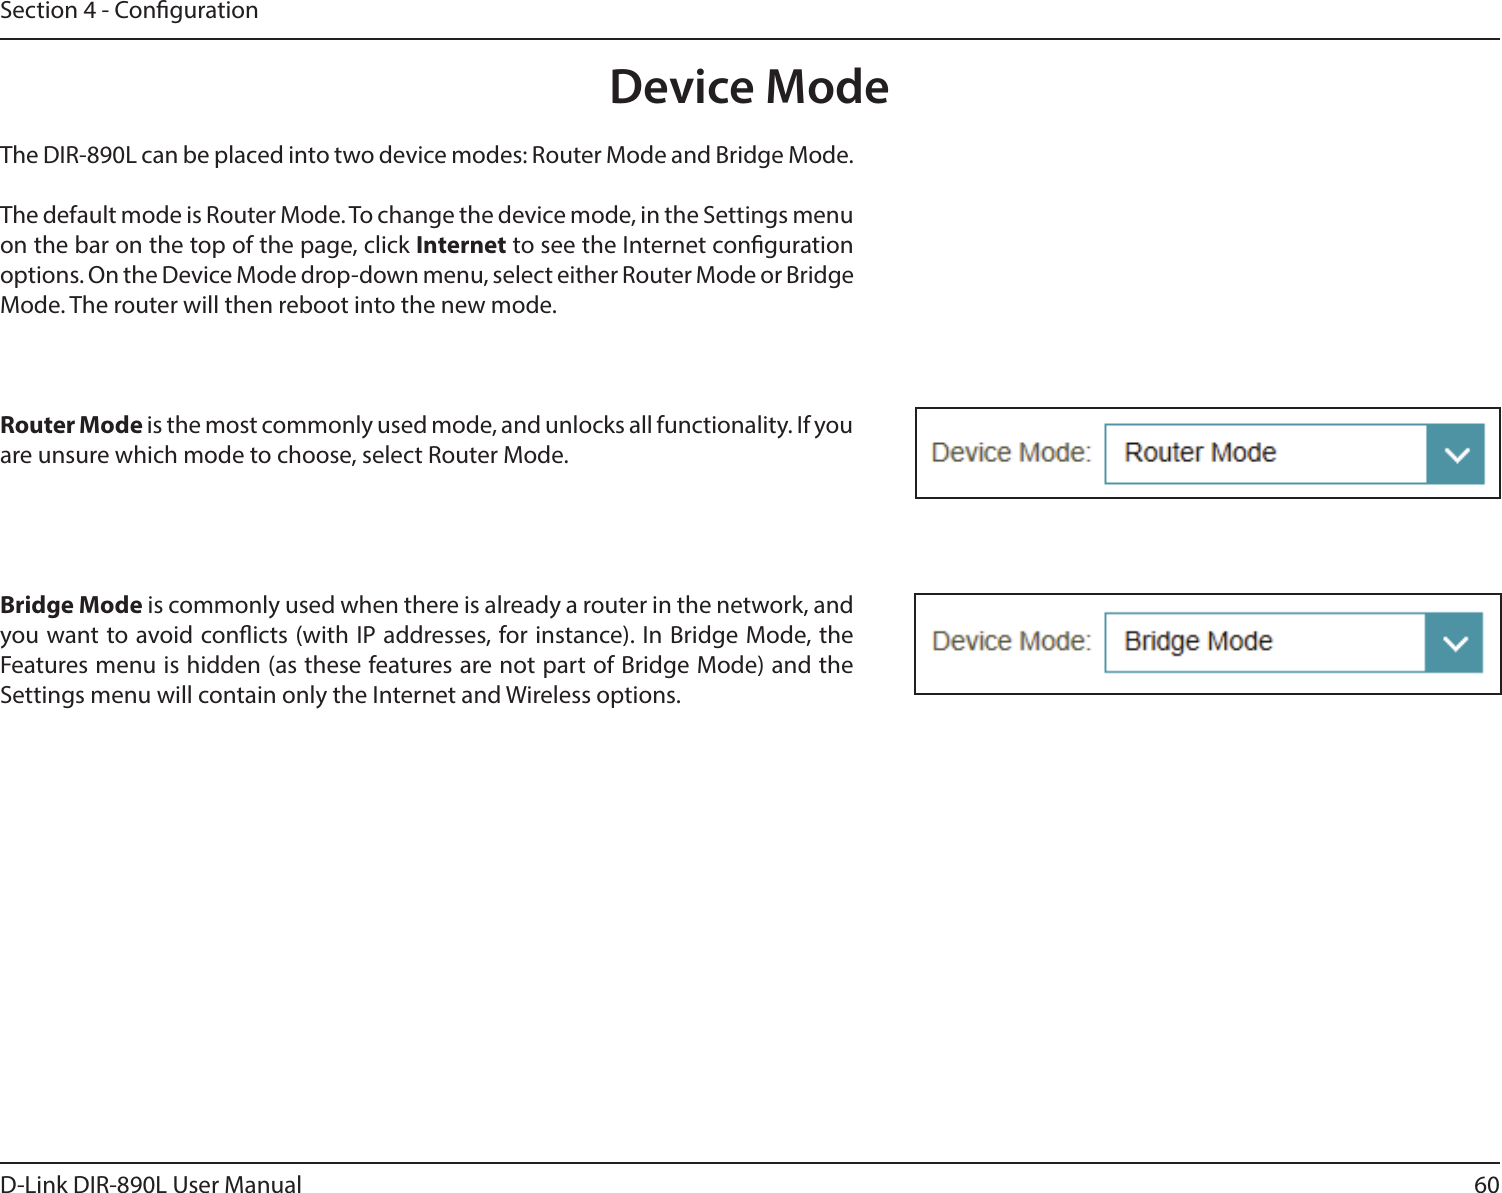 60D-Link DIR-890L User ManualSection 4 - CongurationDevice ModeThe DIR-890L can be placed into two device modes: Router Mode and Bridge Mode.The default mode is Router Mode. To change the device mode, in the Settings menu on the bar on the top of the page, click Internet to see the Internet conguration options. On the Device Mode drop-down menu, select either Router Mode or Bridge Mode. The router will then reboot into the new mode.Router Mode is the most commonly used mode, and unlocks all functionality. If you are unsure which mode to choose, select Router Mode.Bridge Mode is commonly used when there is already a router in the network, and you want to avoid conicts (with IP addresses, for instance). In Bridge Mode, the Features menu is hidden (as these features are not part of Bridge Mode) and the Settings menu will contain only the Internet and Wireless options.